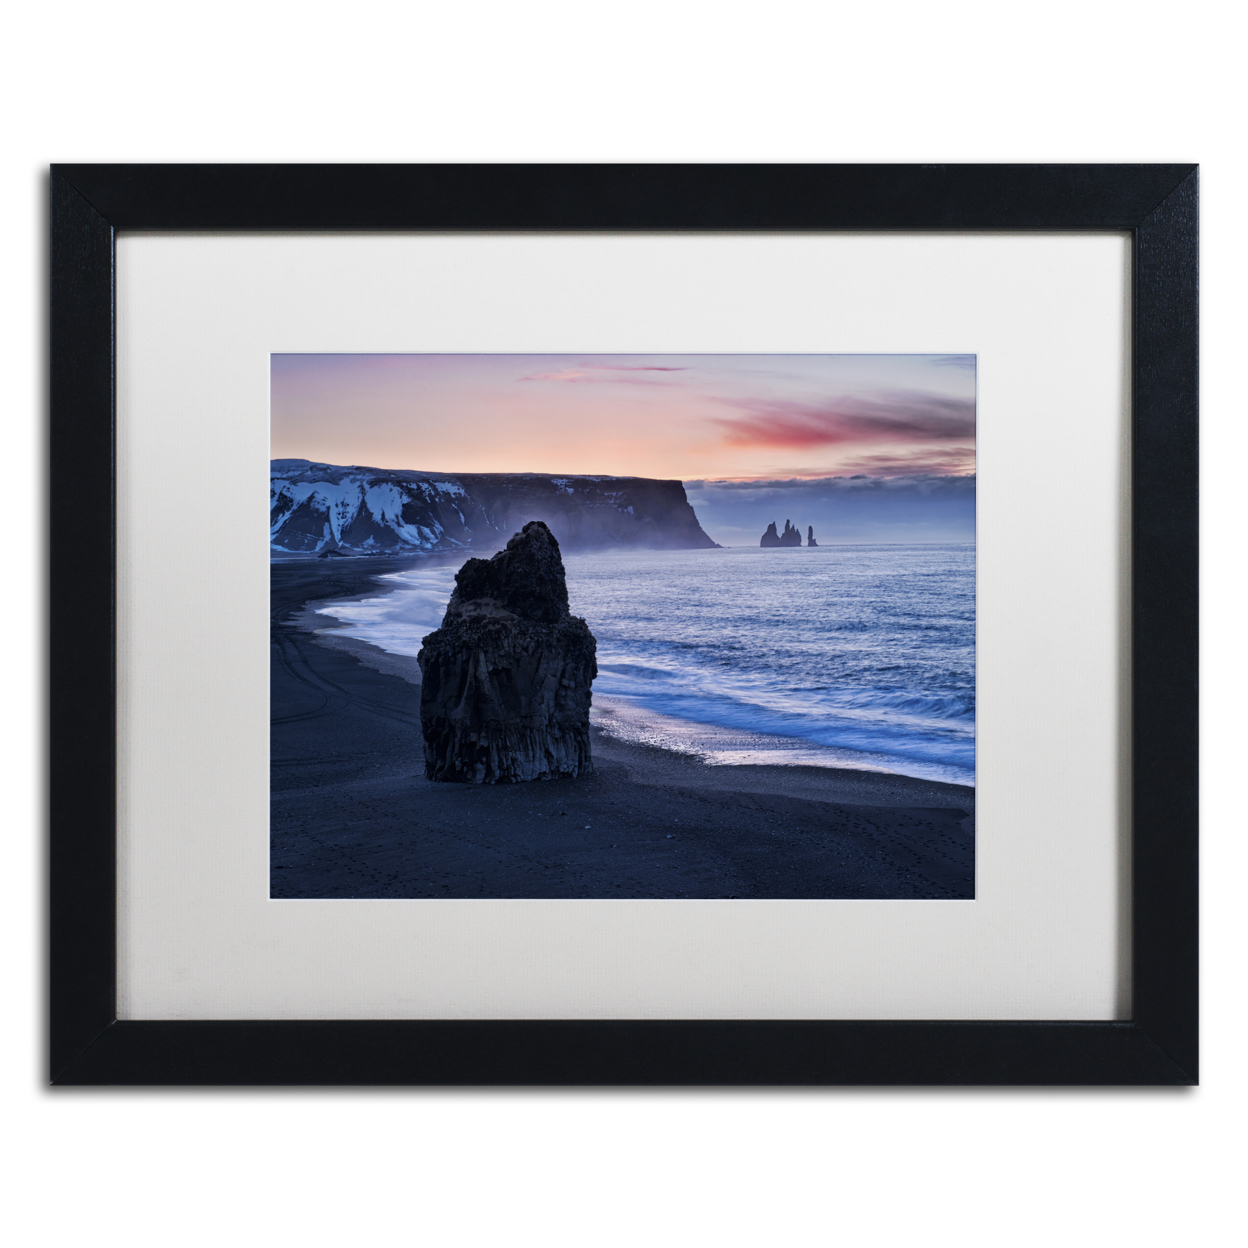 Michael Blanchette Photography 'Pinnacles' Black Wooden Framed Art 18 X 22 Inches